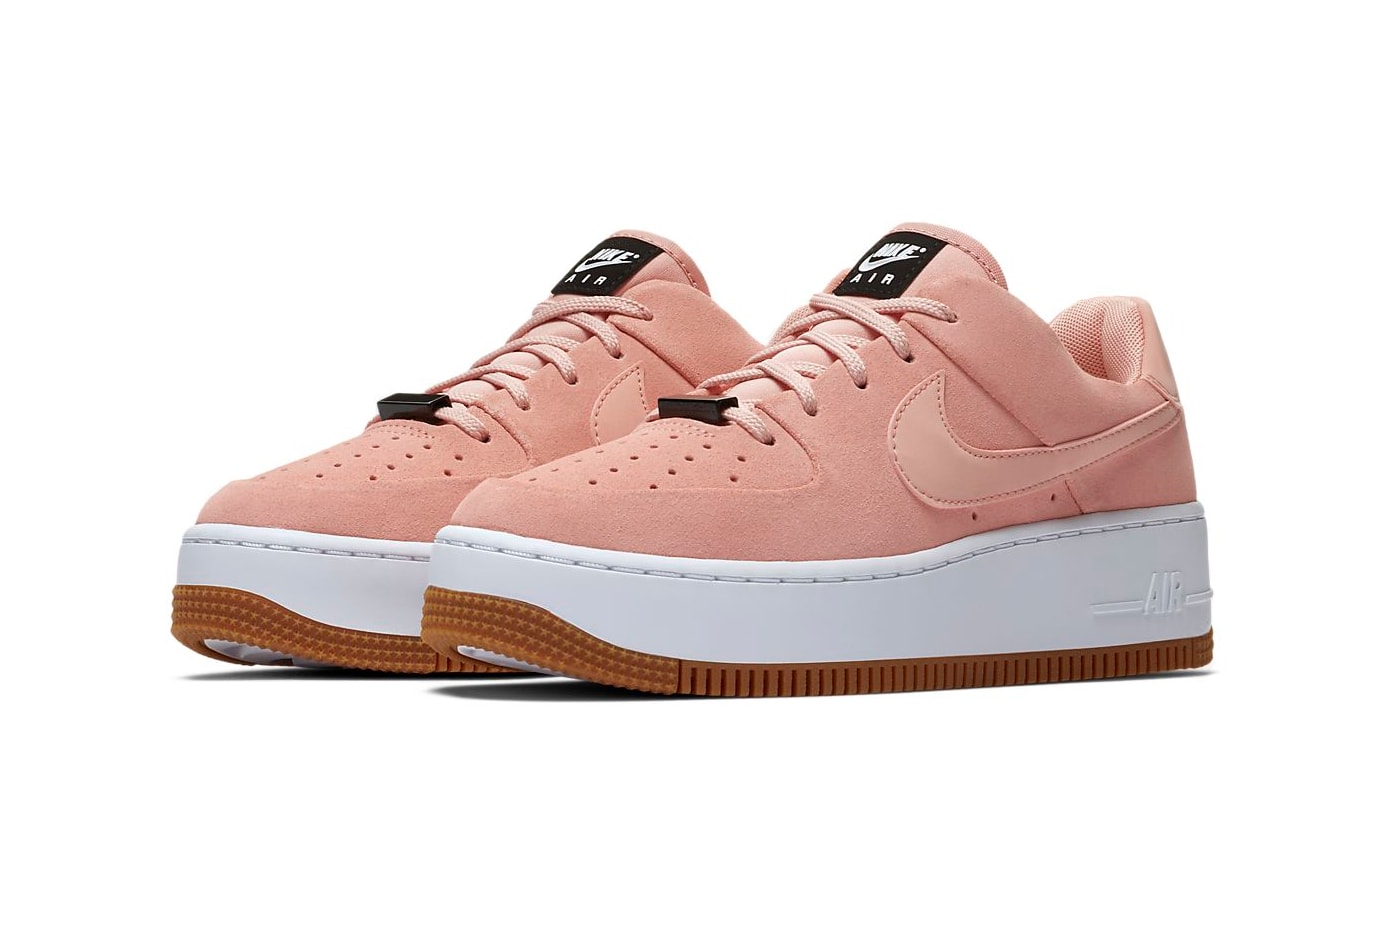 Nike Air Force 1 Sage Low Coral Stardust Pink Platform Women's sneakers trainers